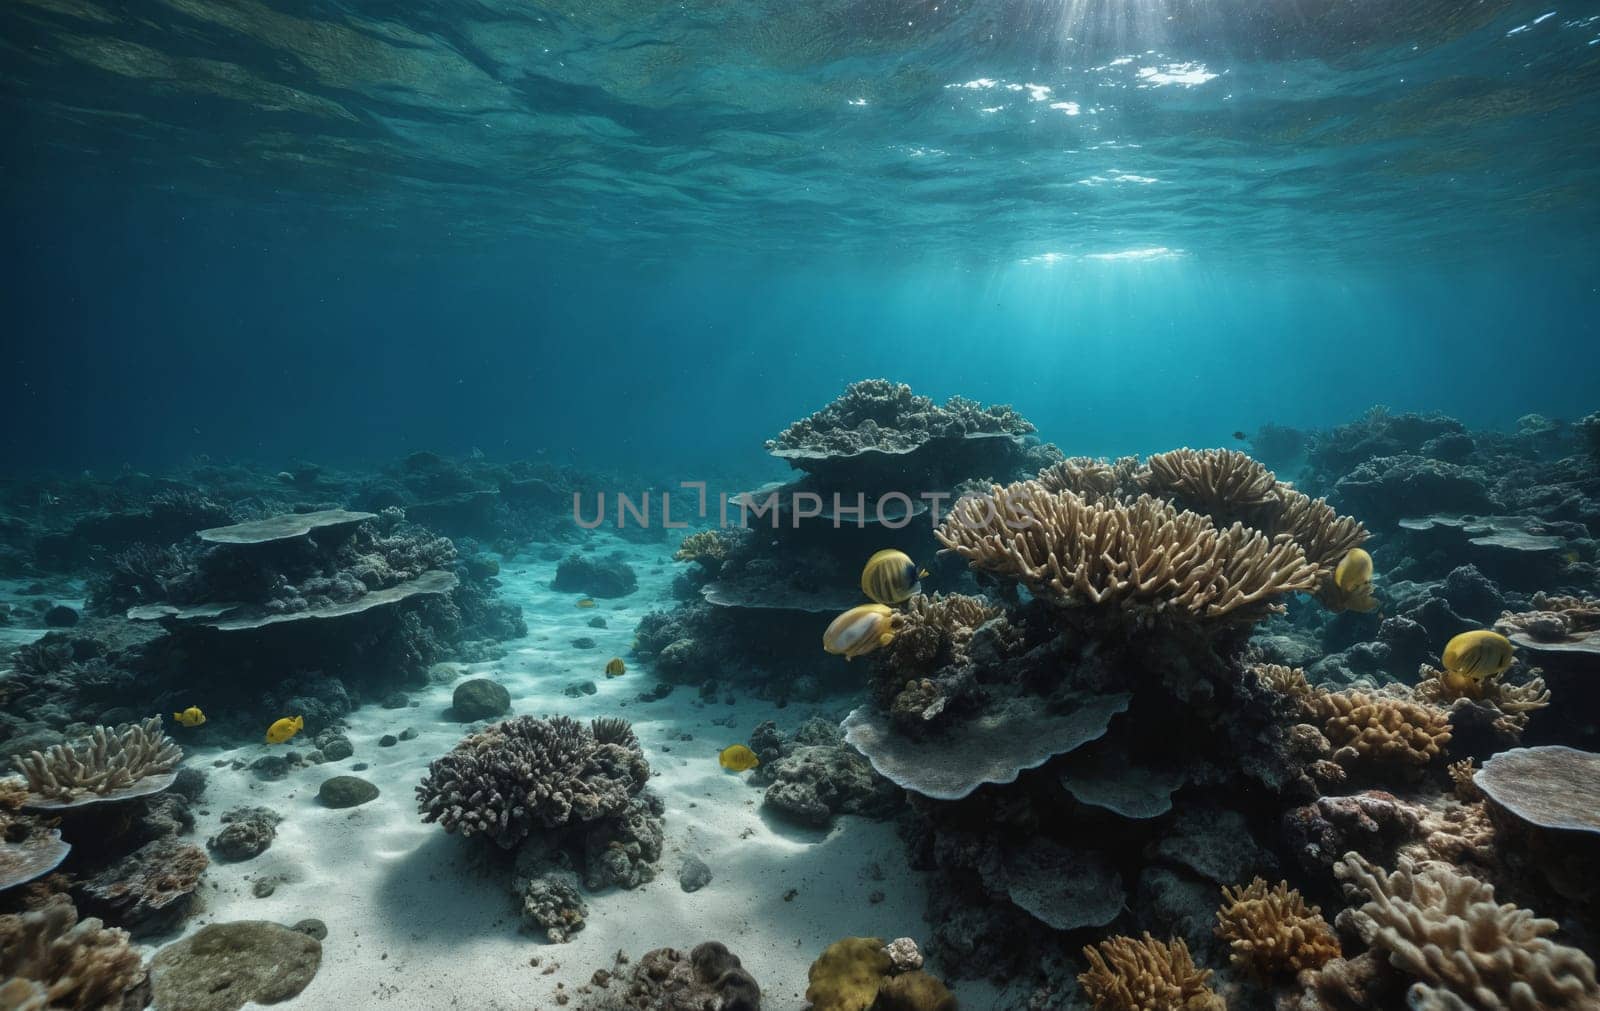 The fluid sunlight filters through the water over a vibrant coral reef, creating a breathtaking underwater landscape in coastal and oceanic landforms